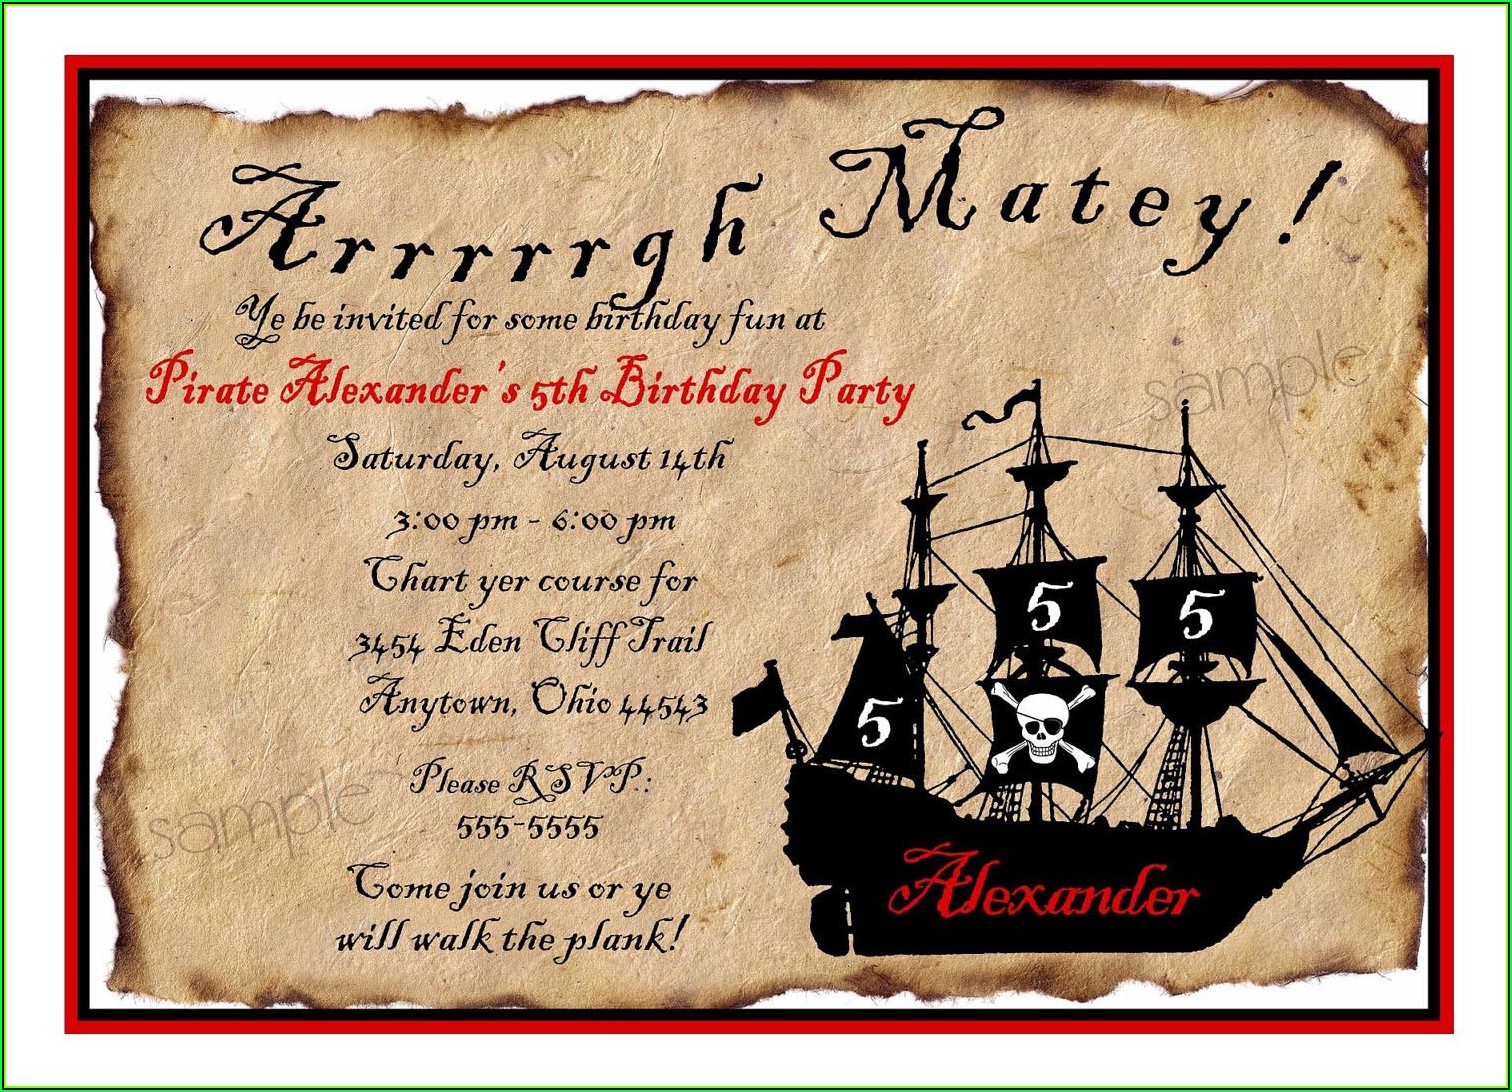 Pirate And Princess Party Invitations Template Free